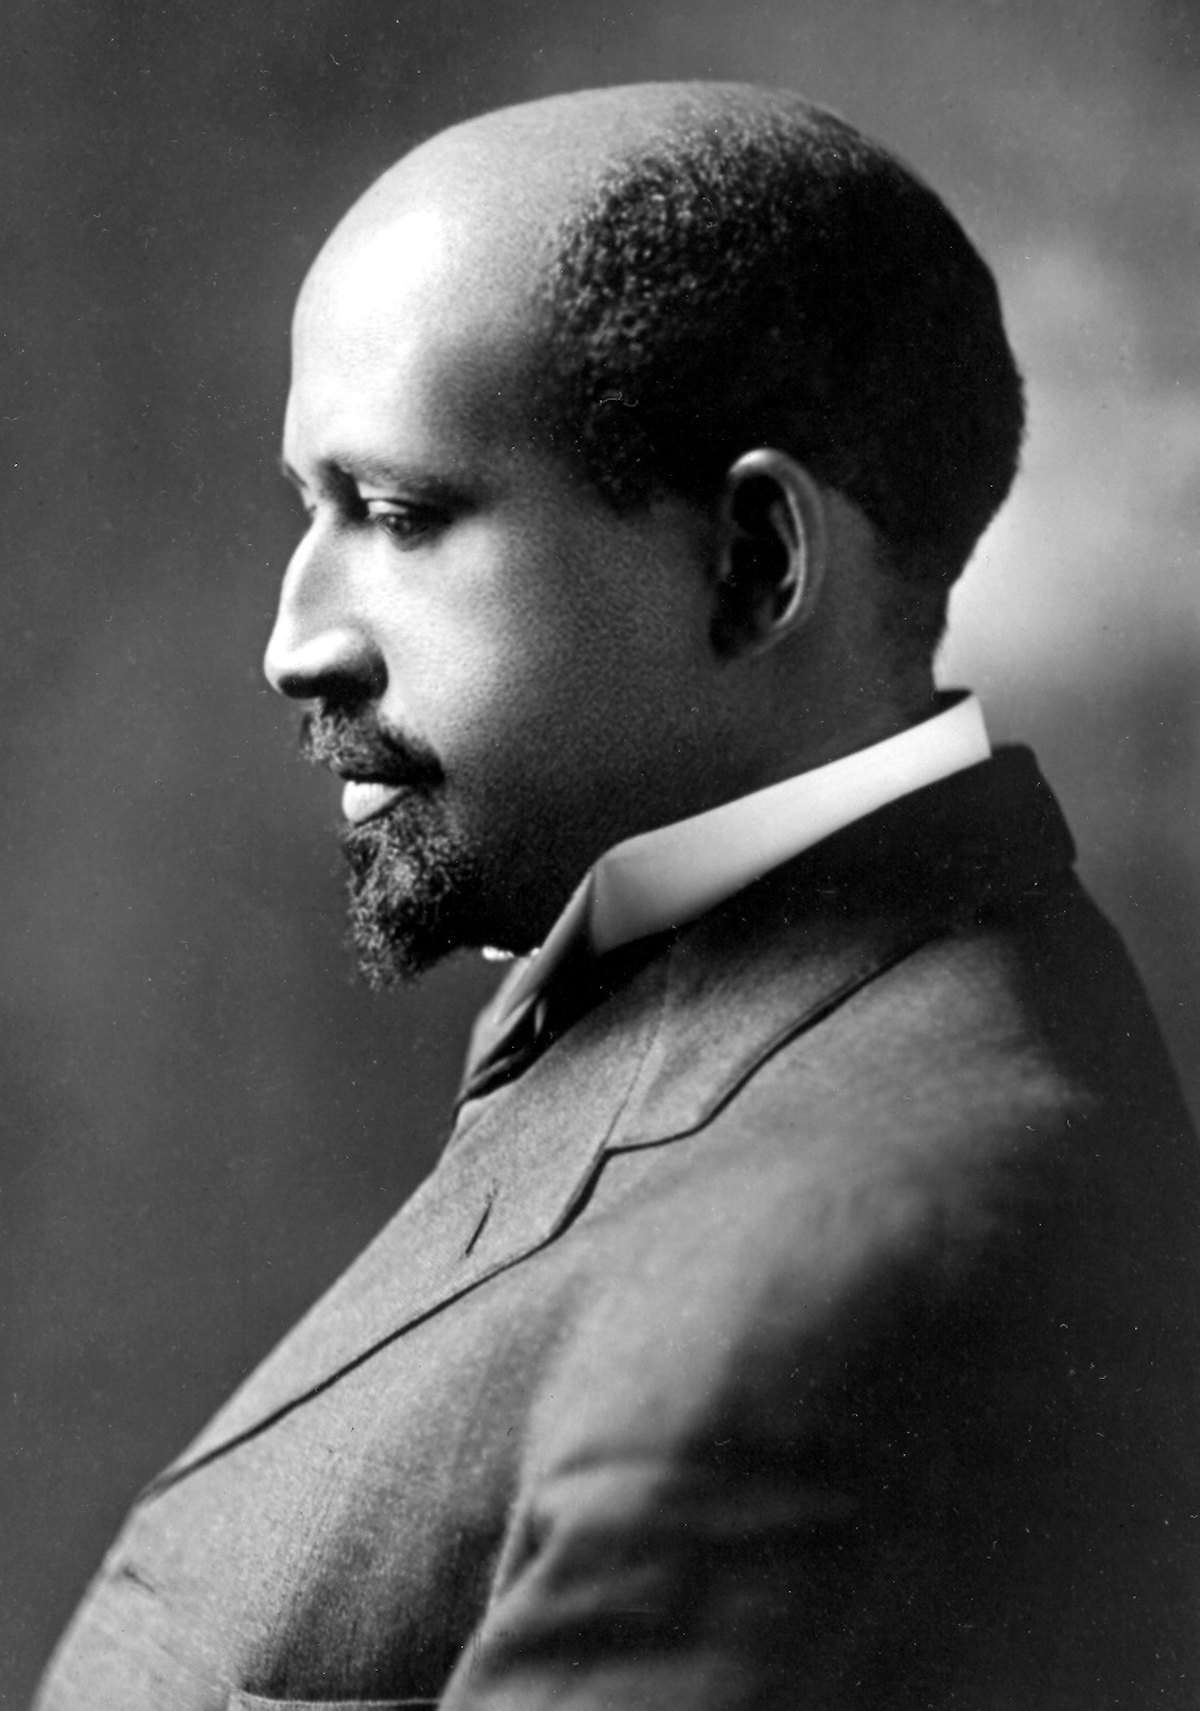 W.E.B. Du Bois was a respected writer and civil rights activist of his time. He was the founder of the NAACP, which received 'Abdu'l-Baha as a guest at its fourth conference in 1912. Du Bois was so impressed by 'Abdu'l-Baha's talk that he published it in its entirety in The Crisis, the official publication of the NAACP, along with a photo of 'Abdu'l-Baha. Du Bois' goodwill towards the Faith endured throughout his life. His wife, Nina Du Bois, became a Baha'i in 1936.